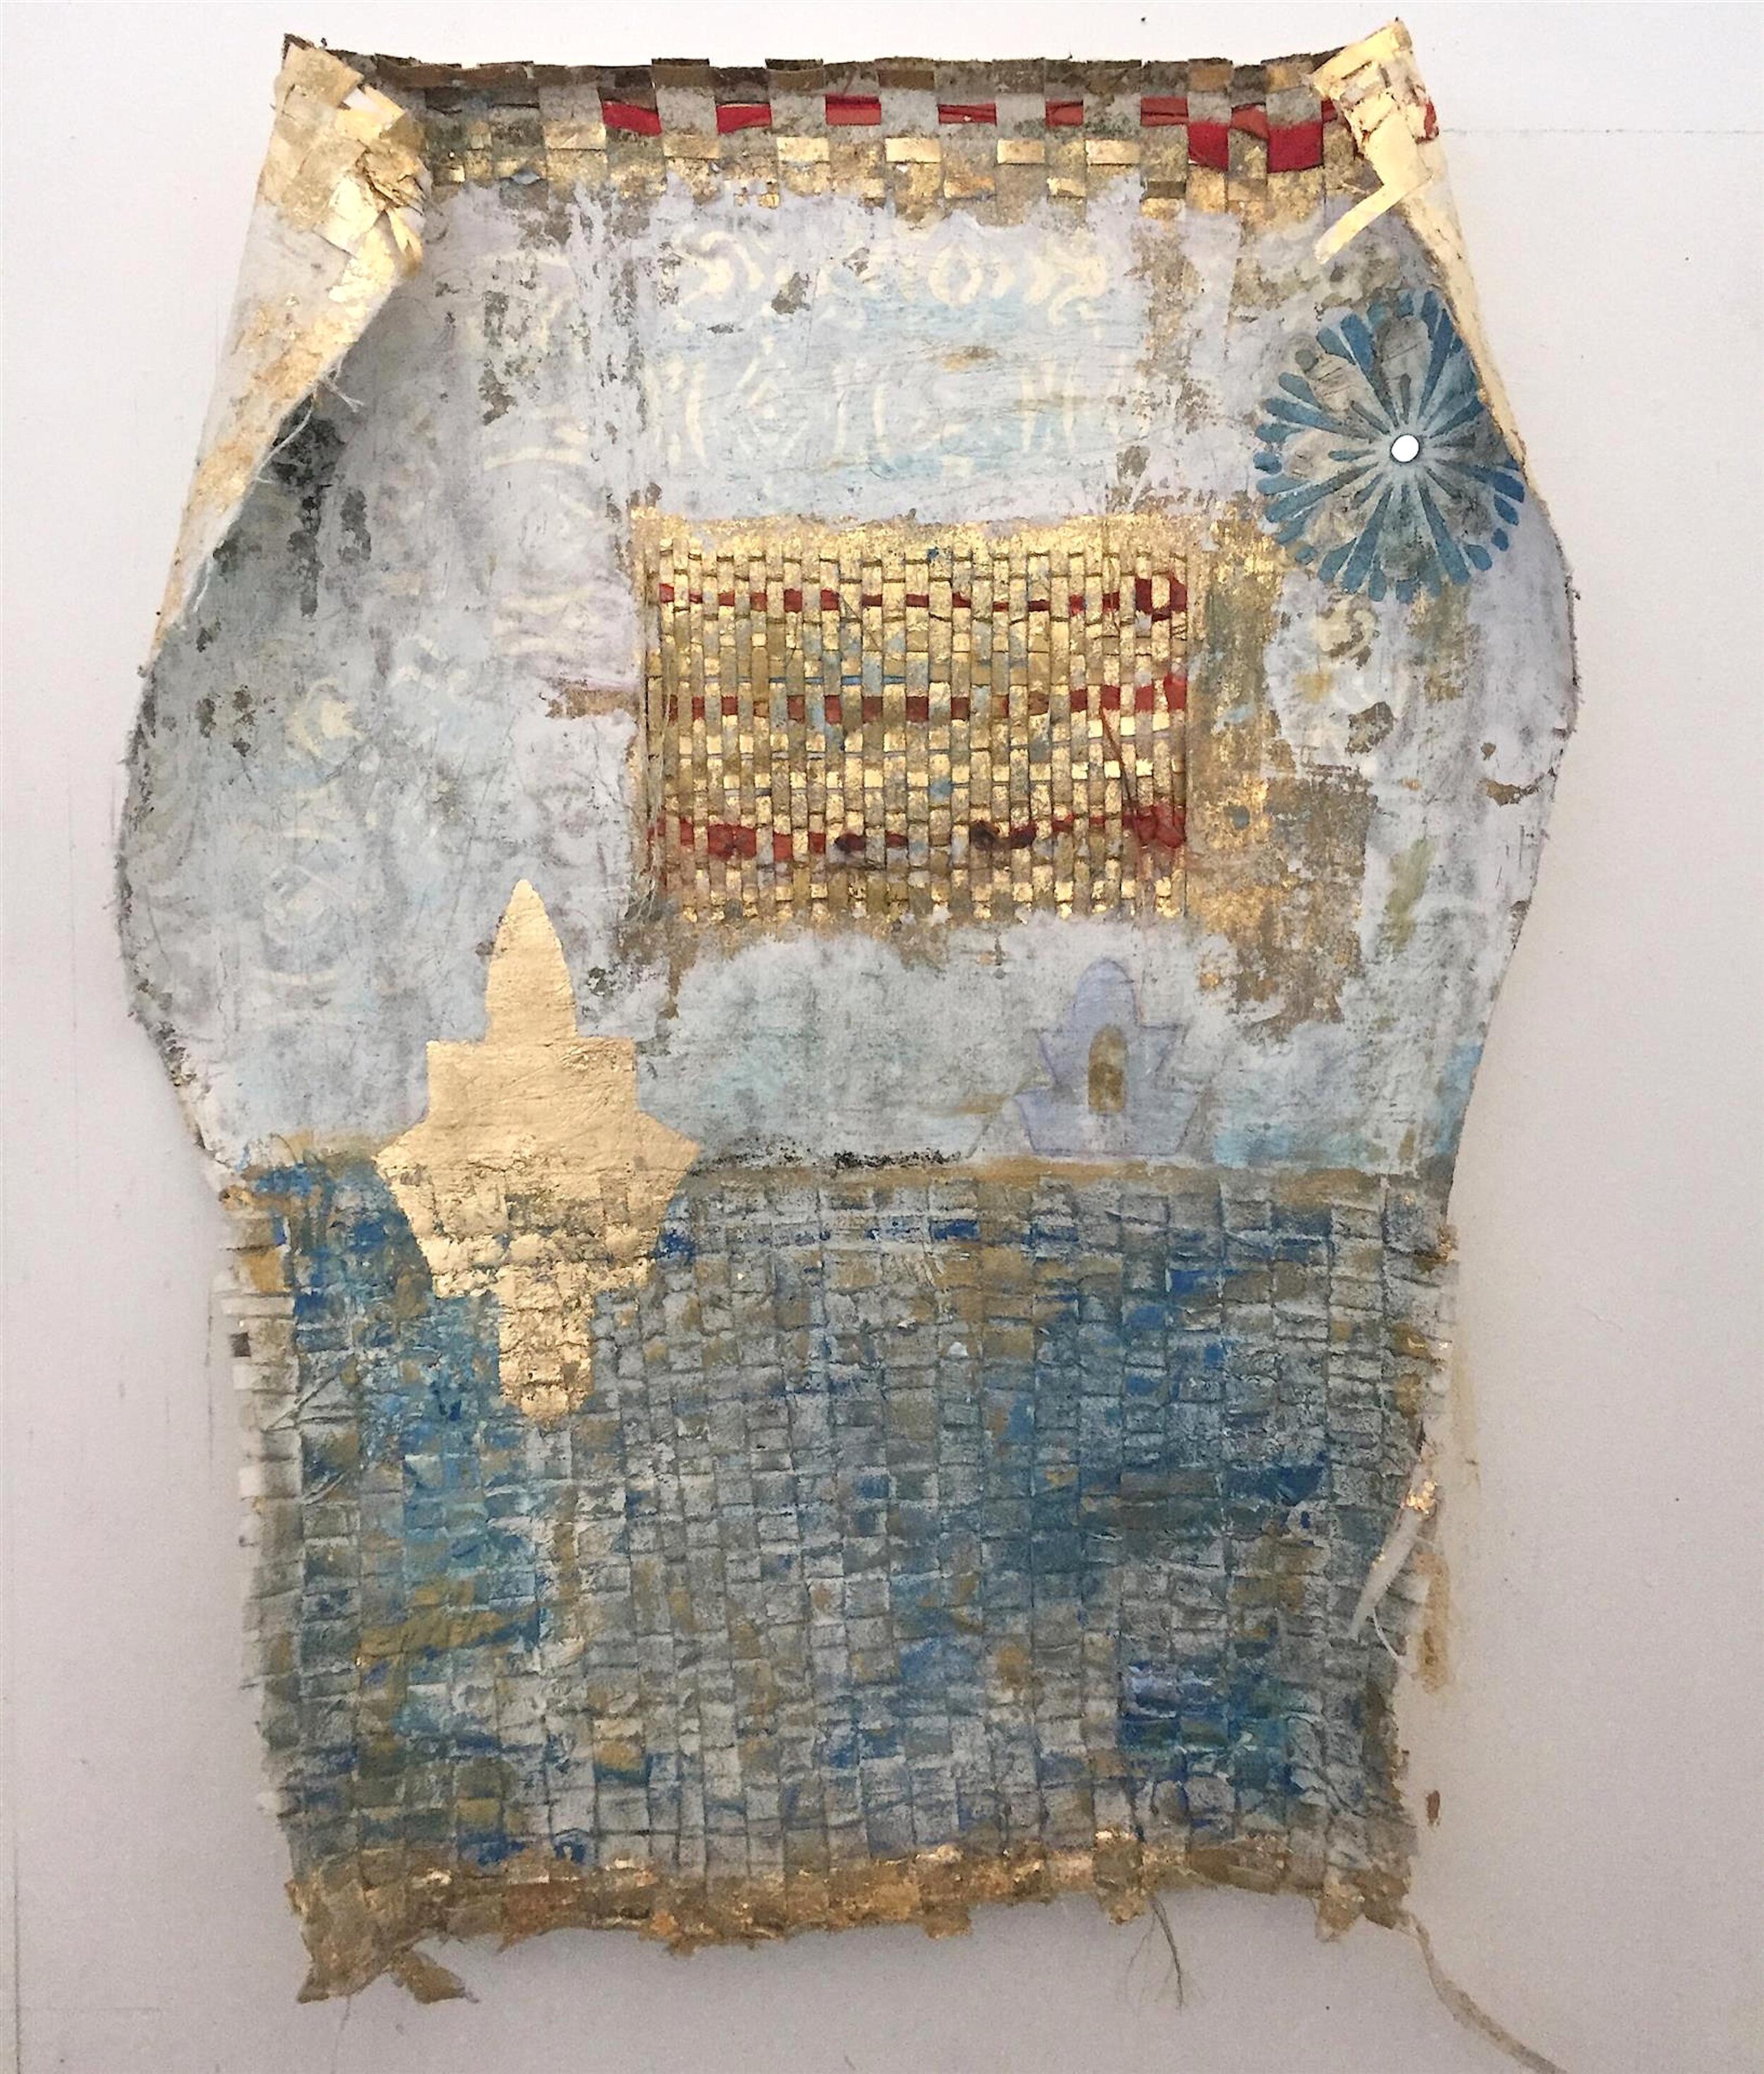  Susan Siefer,  Walking into I t, Mixed media, 24 x 30 x 6 